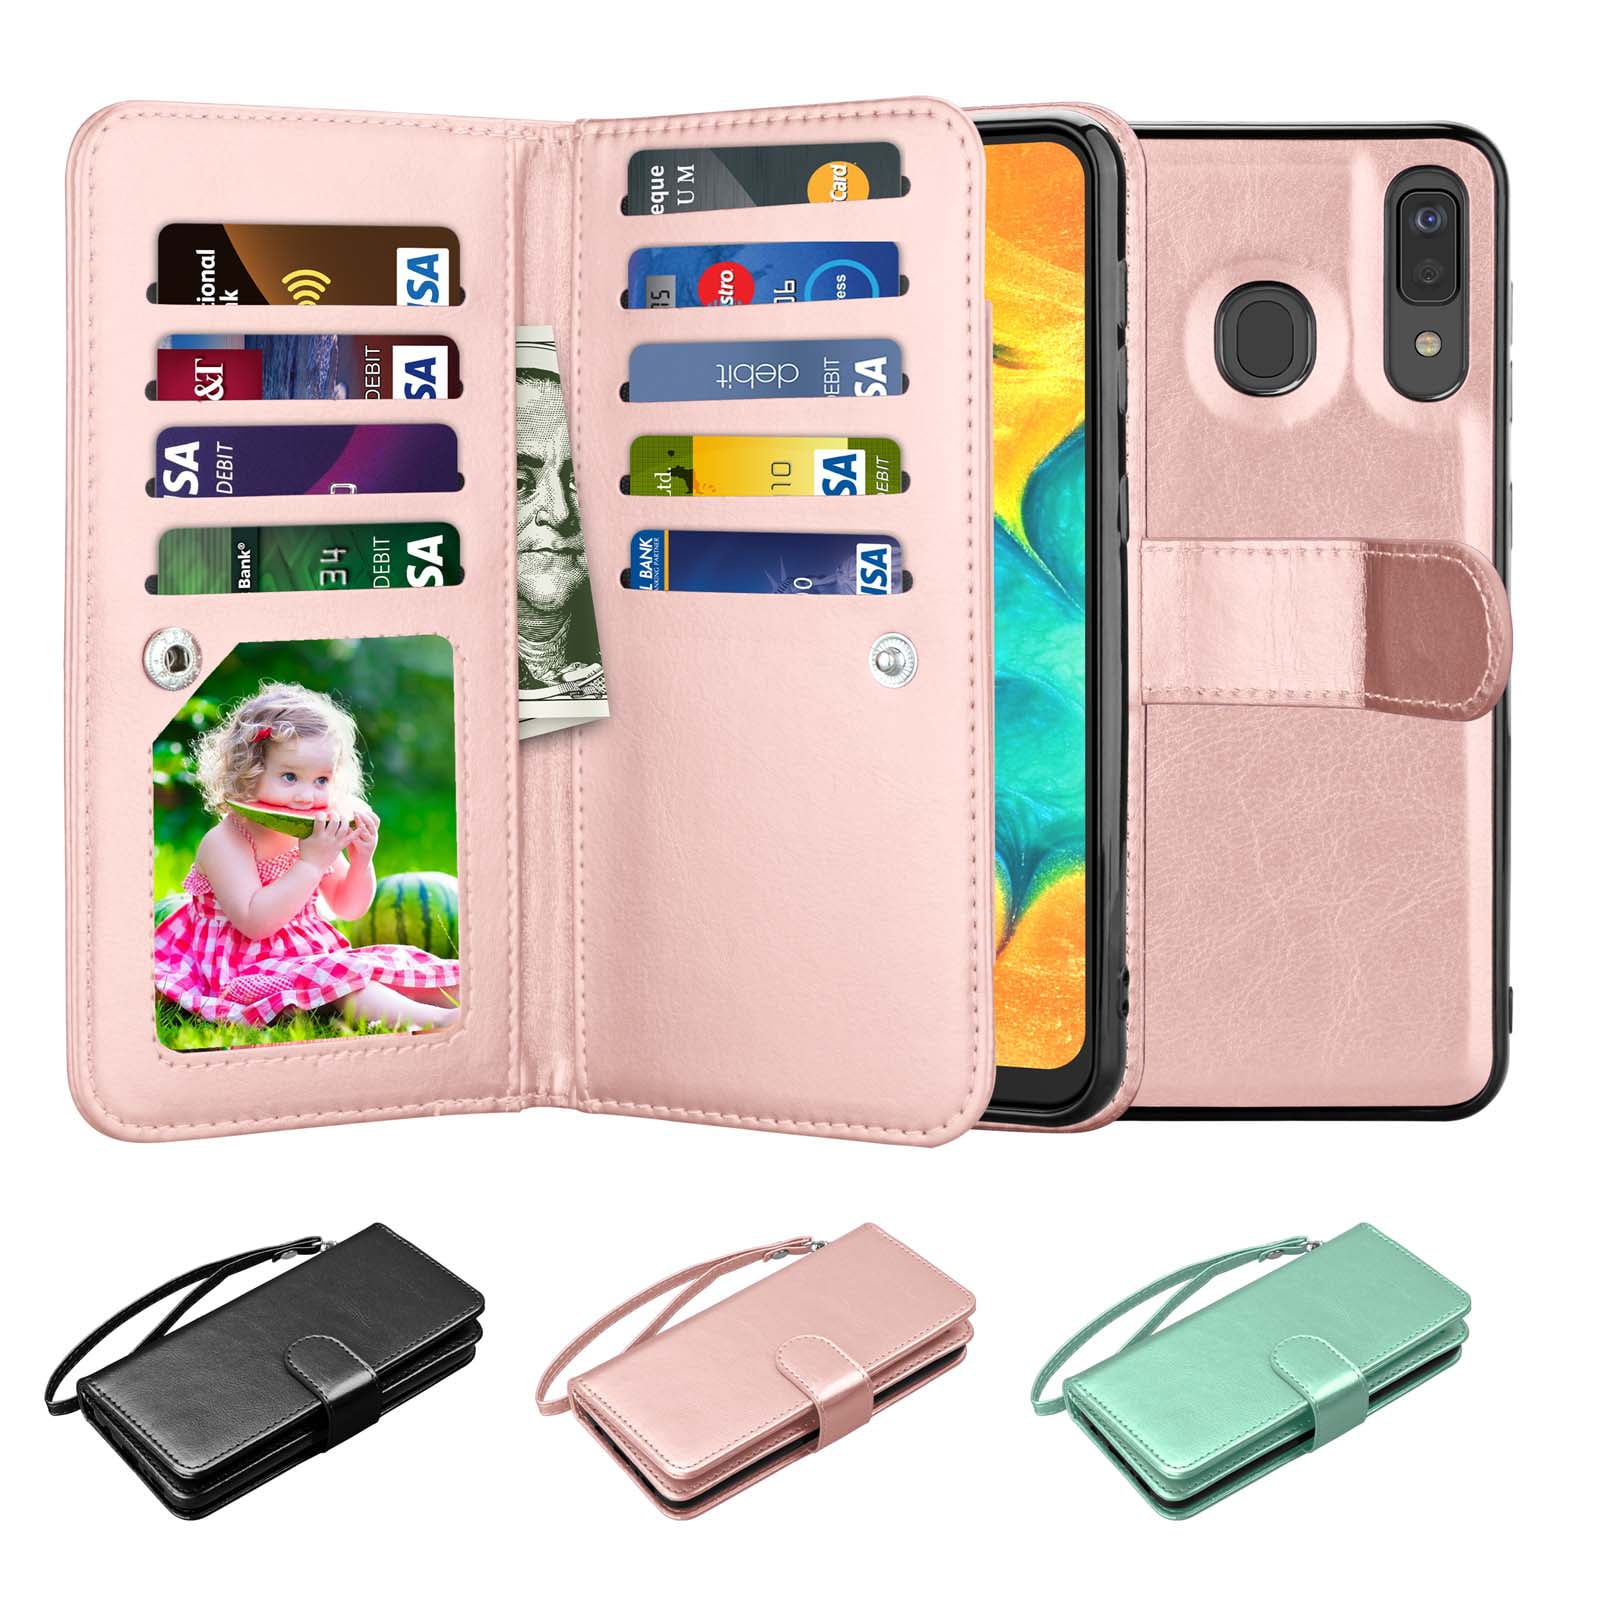 Ultra Slim PU Leather Wallet/Folio Notebook Black Magnetic Closure Kickstand Soft TPU Full Cover Compatible Samsung Galaxy A30/A20 Phone Galaxy A30/A20 Flip Case with Card Holder